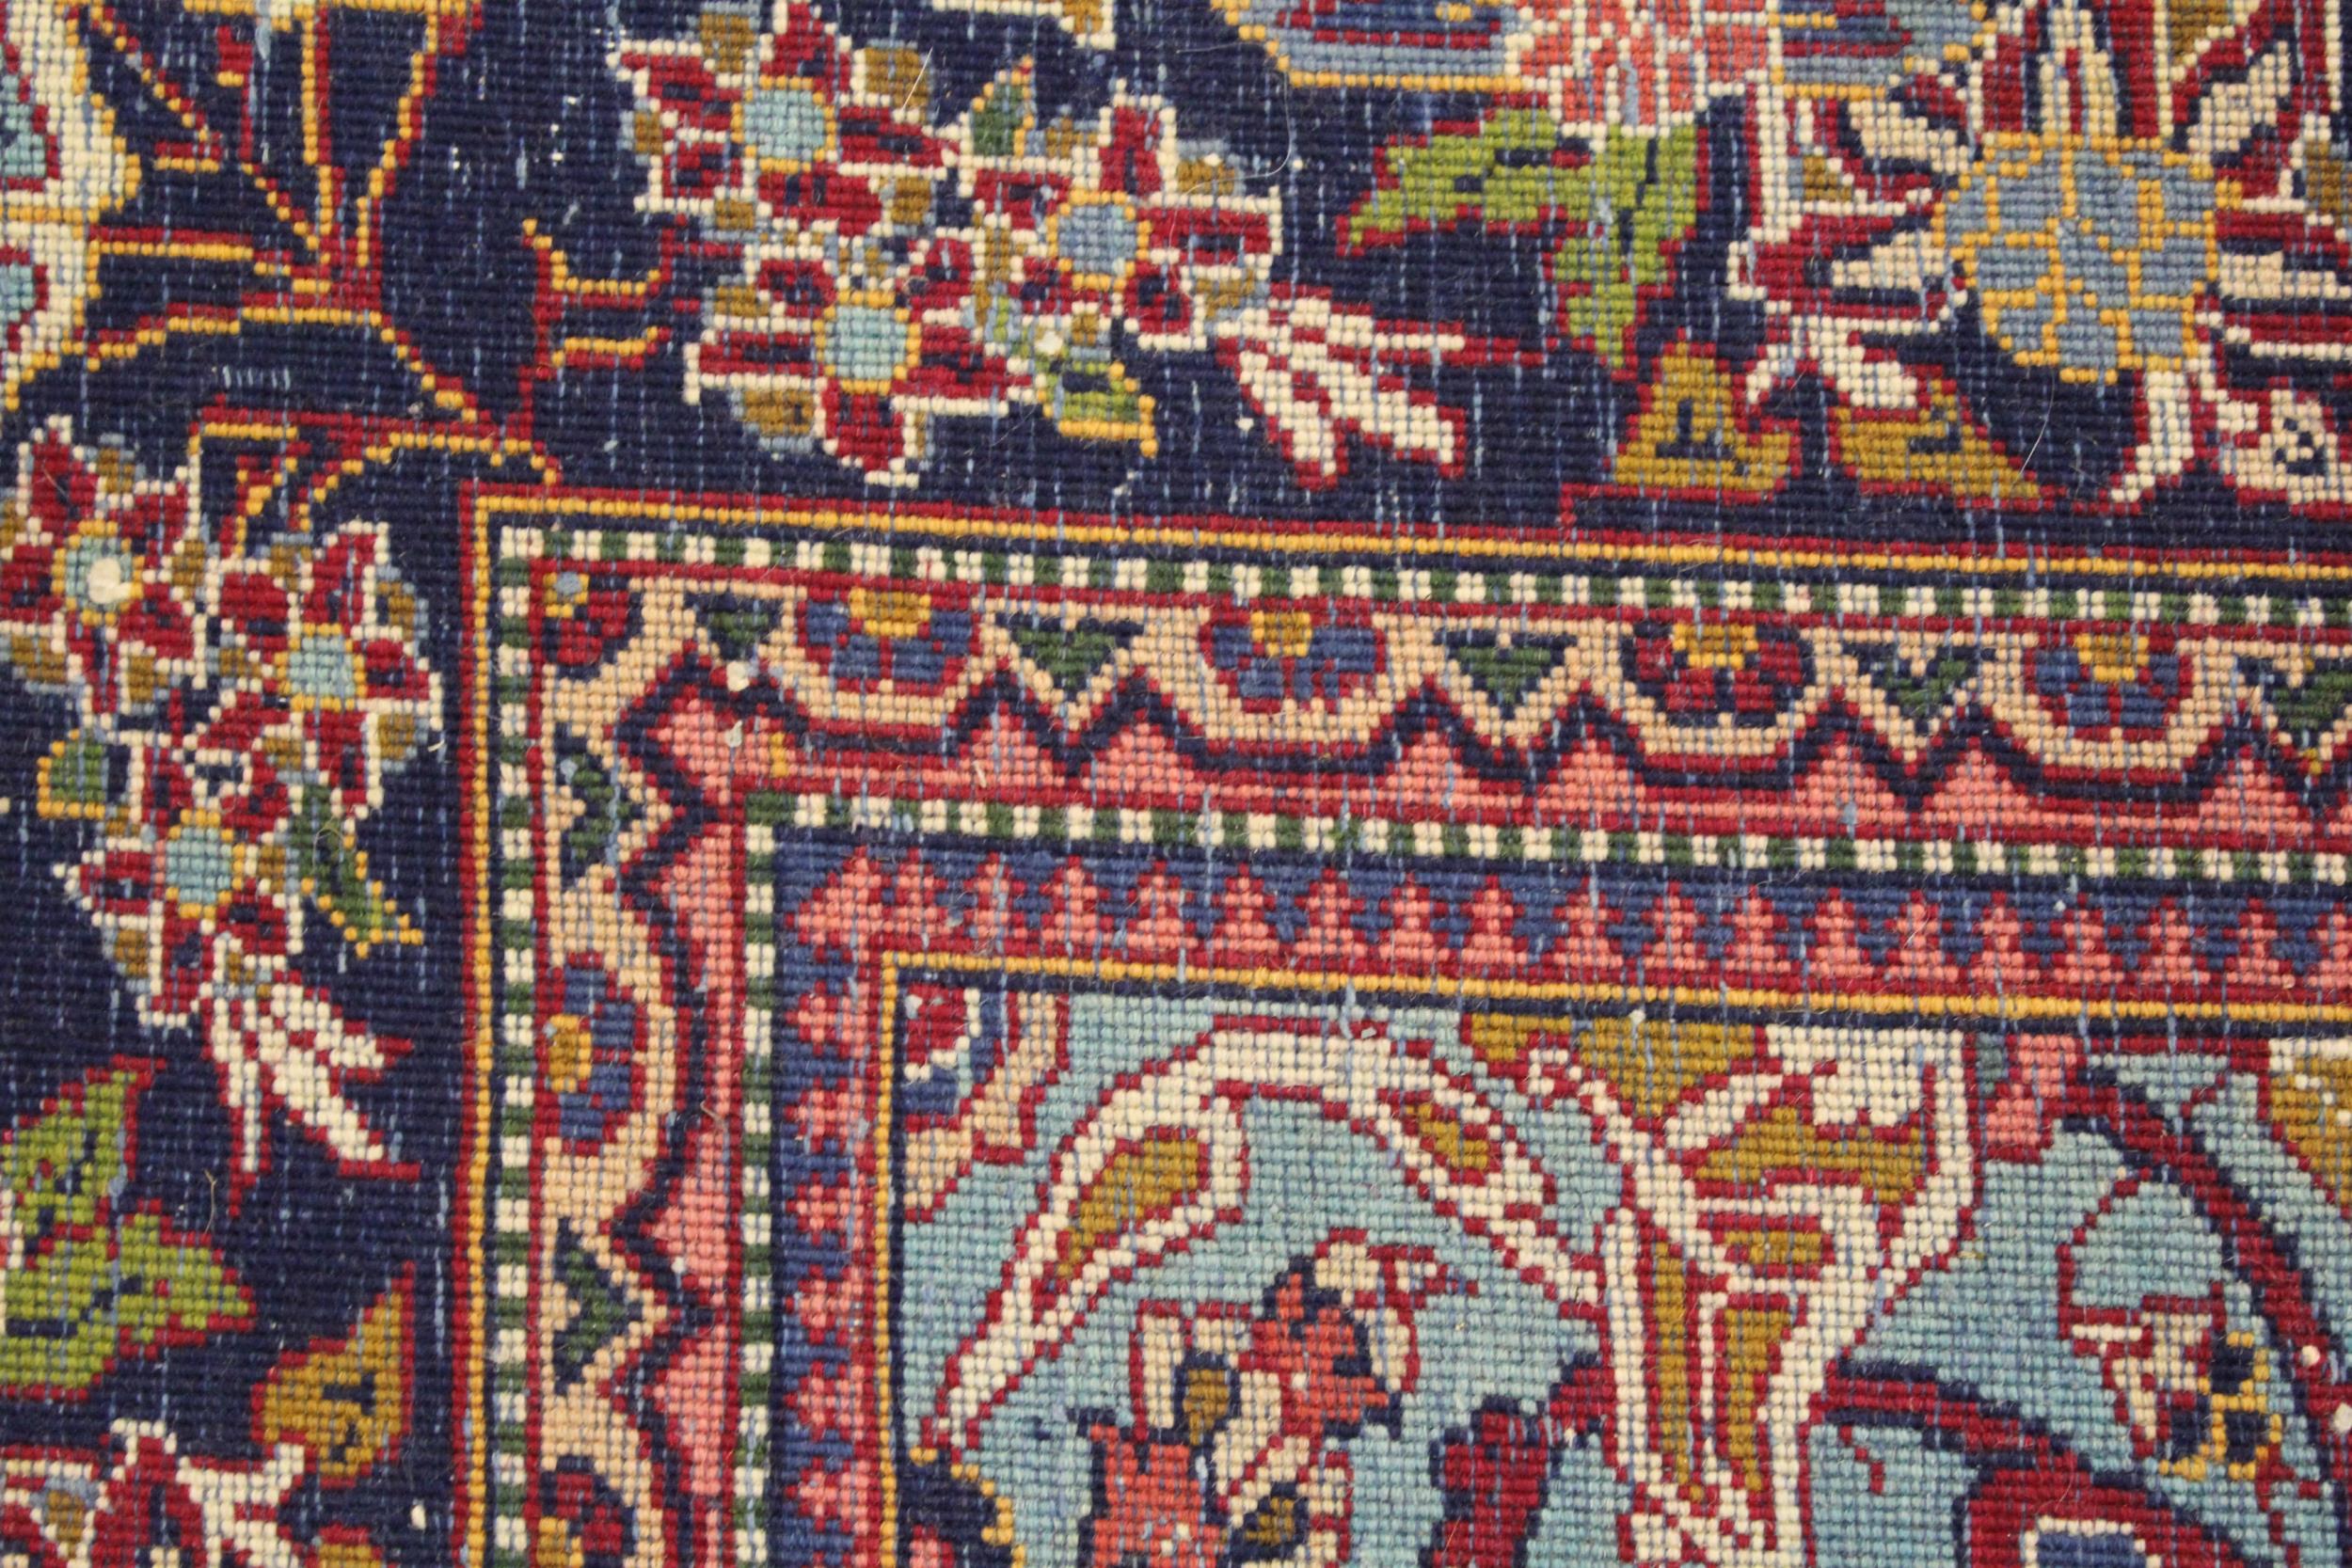 Qum rug with a pictorial centre medallion and all over stylised floral design on wine red ground - Image 4 of 4